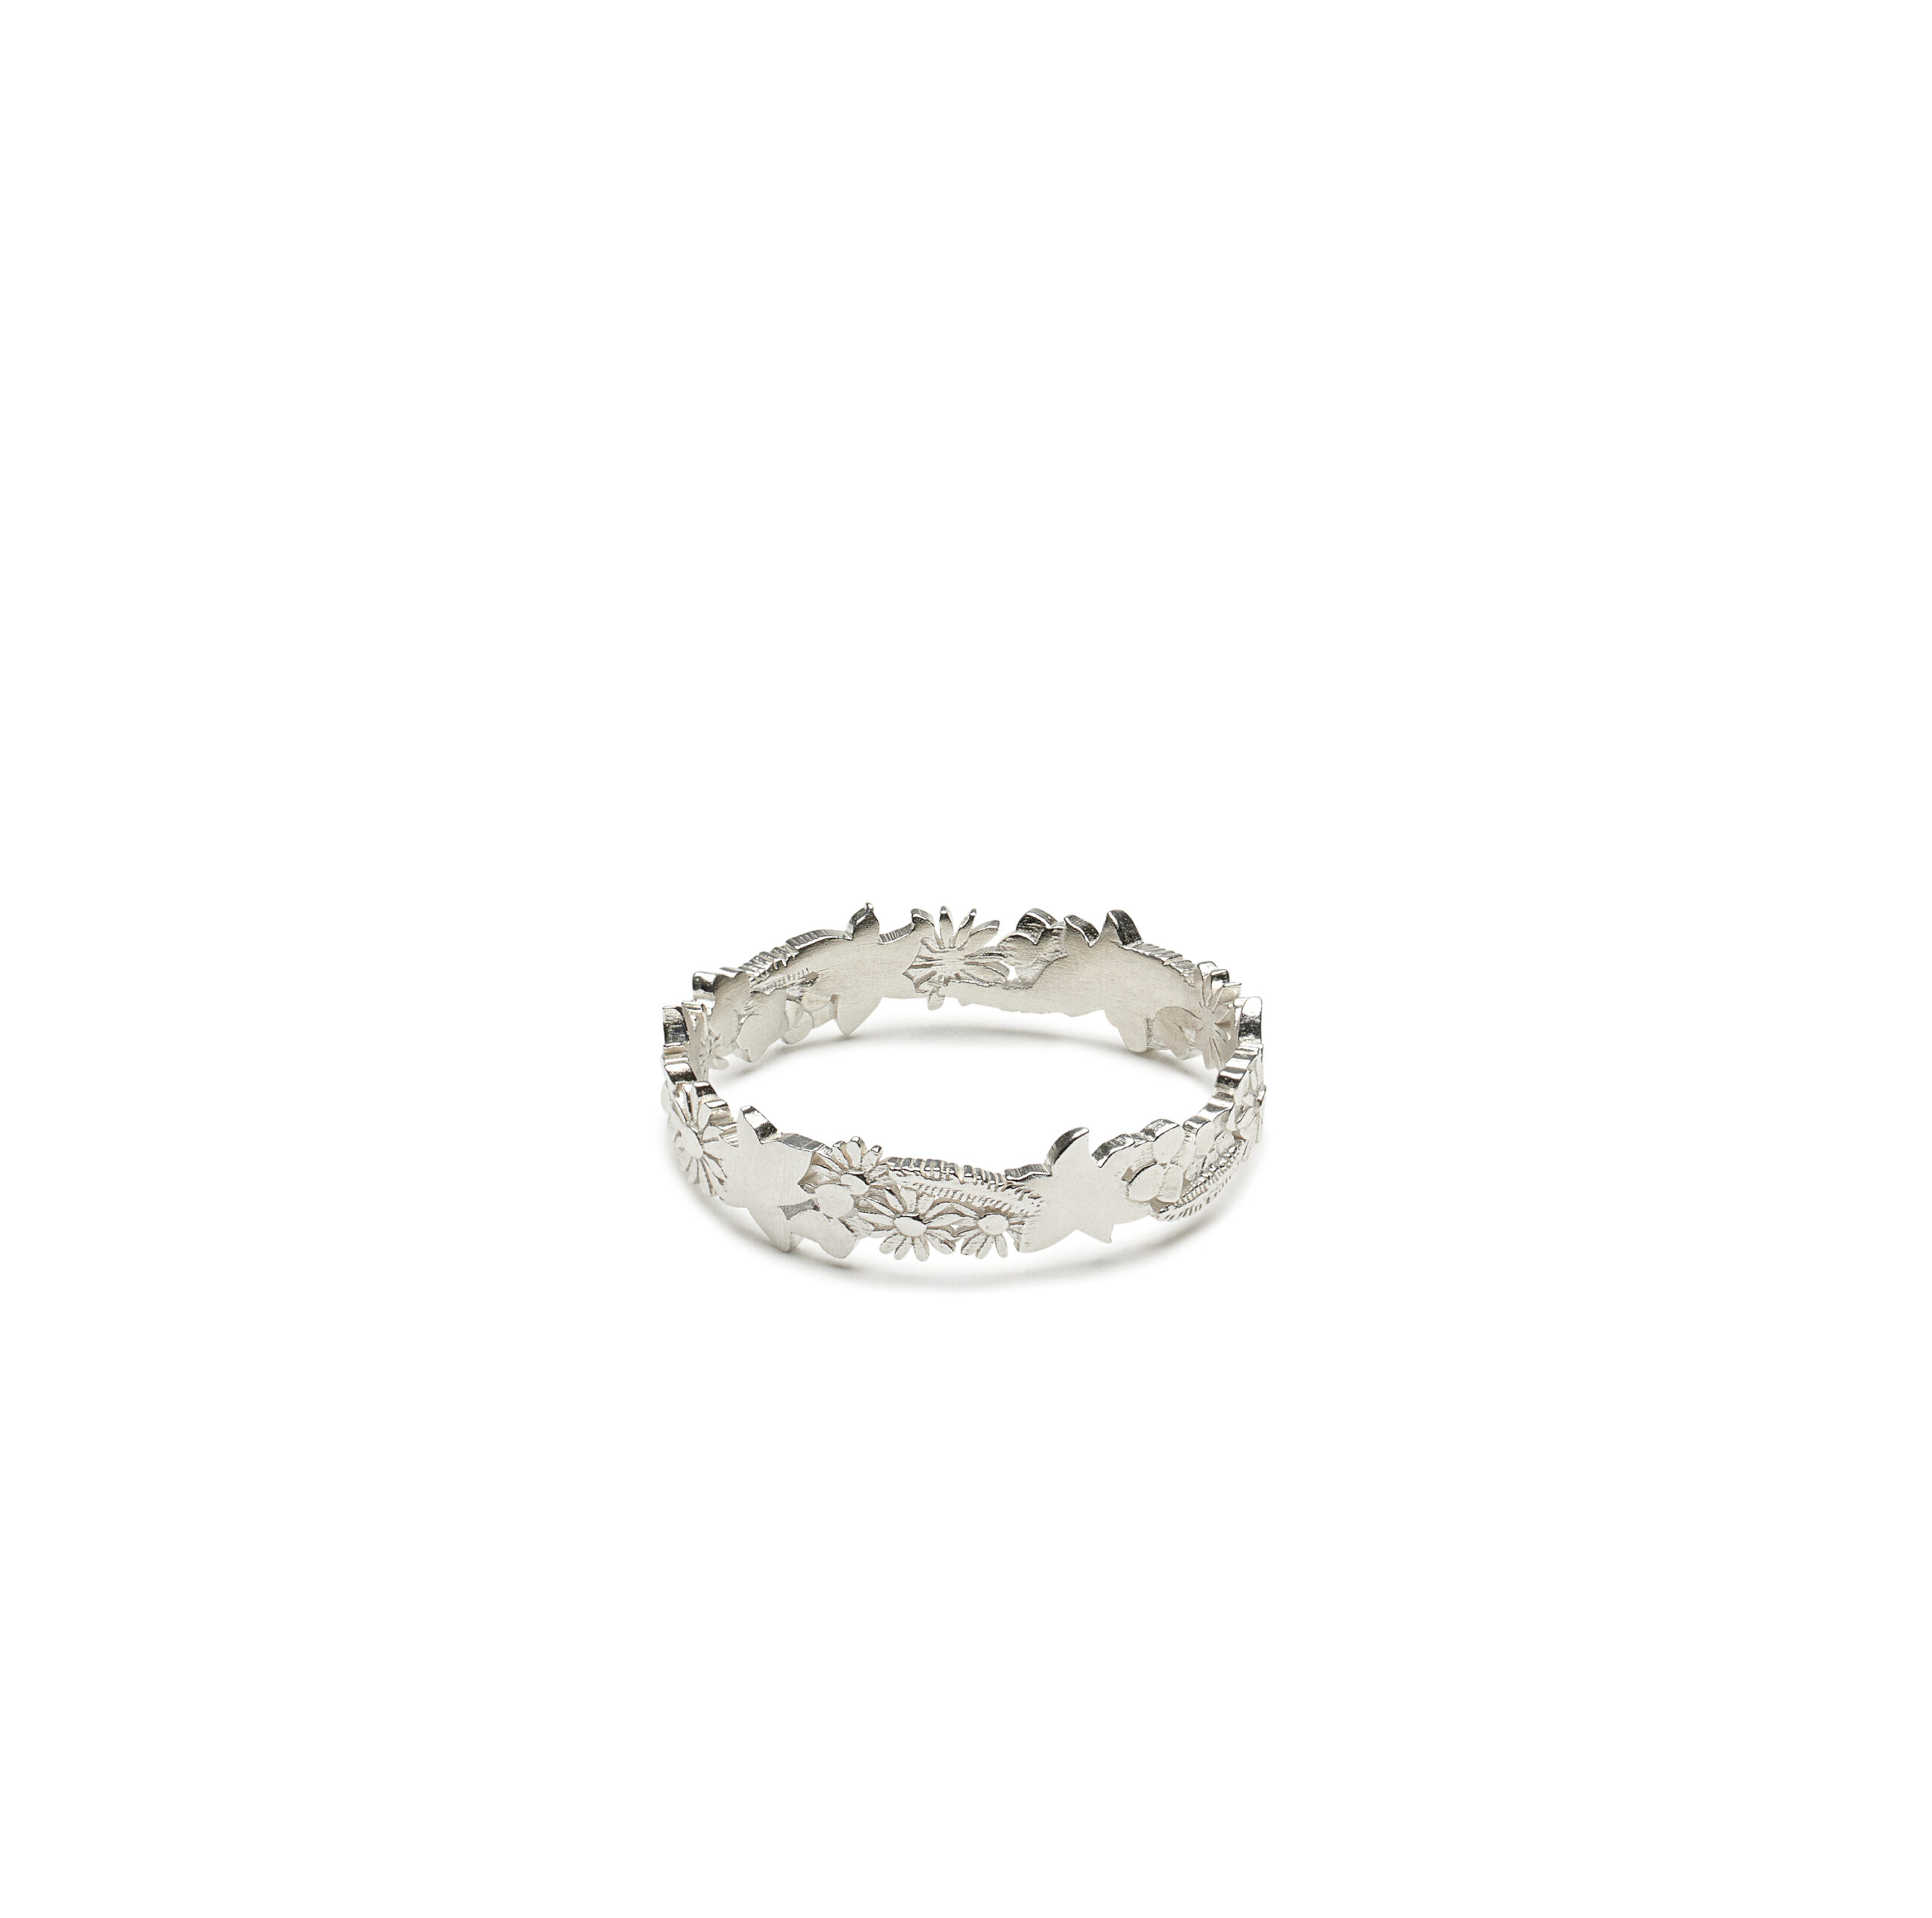 Ring depicting Vermont wildflowers in sterling silver